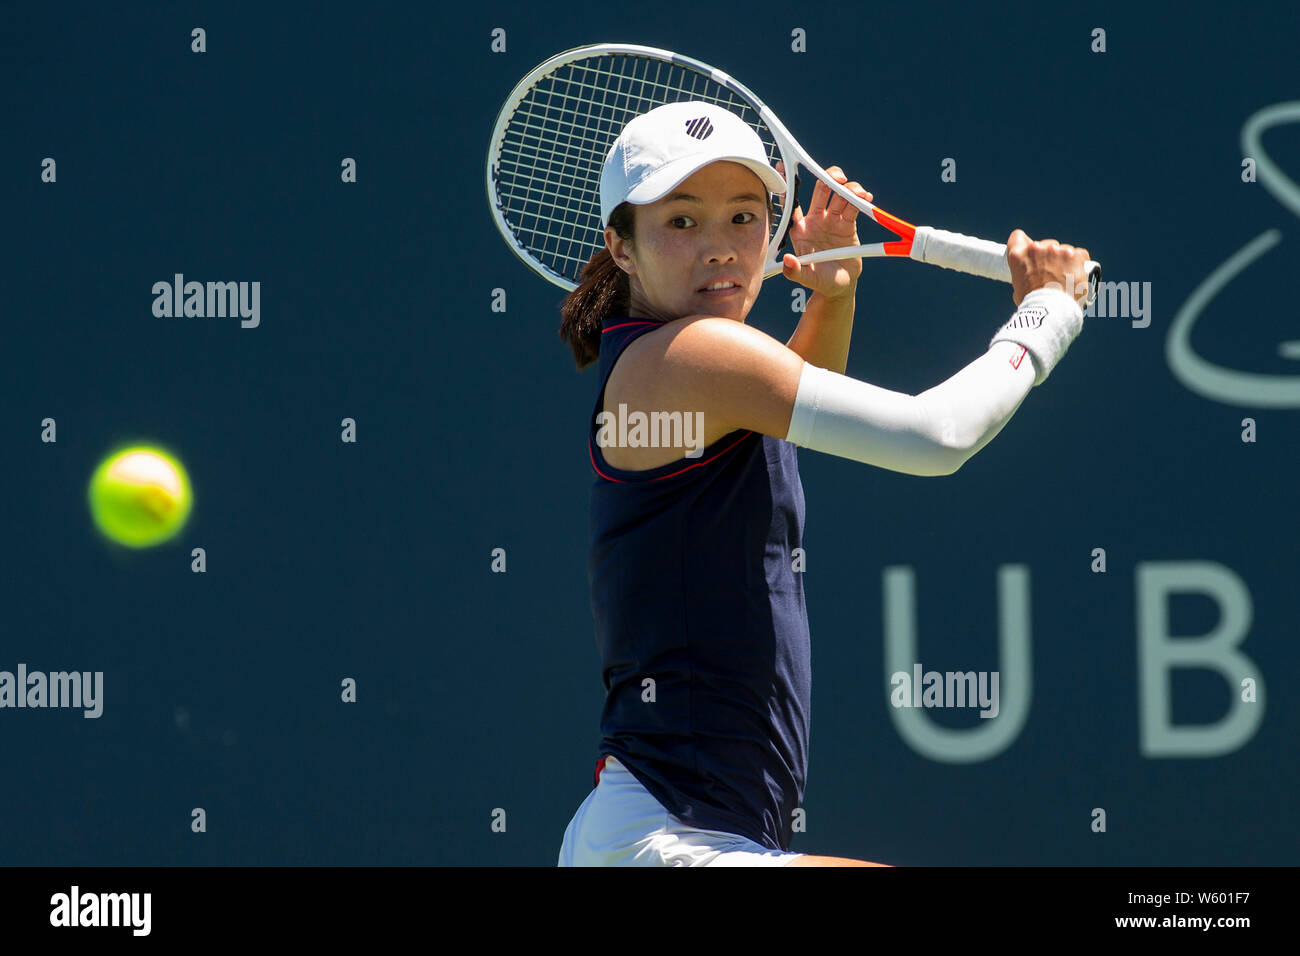 San Jose, California, USA. 28th July, 2019. Danielle Lao (USA) in action where she was defeated by Kristie Ahn (USA) 6-1, 6-4 in the final round of qualifying in the Mubadala Silicon Valley Classic at San Jose State in San Jose, California. © Mal Taam/TennisClix/CSM/Alamy Live News Stock Photo